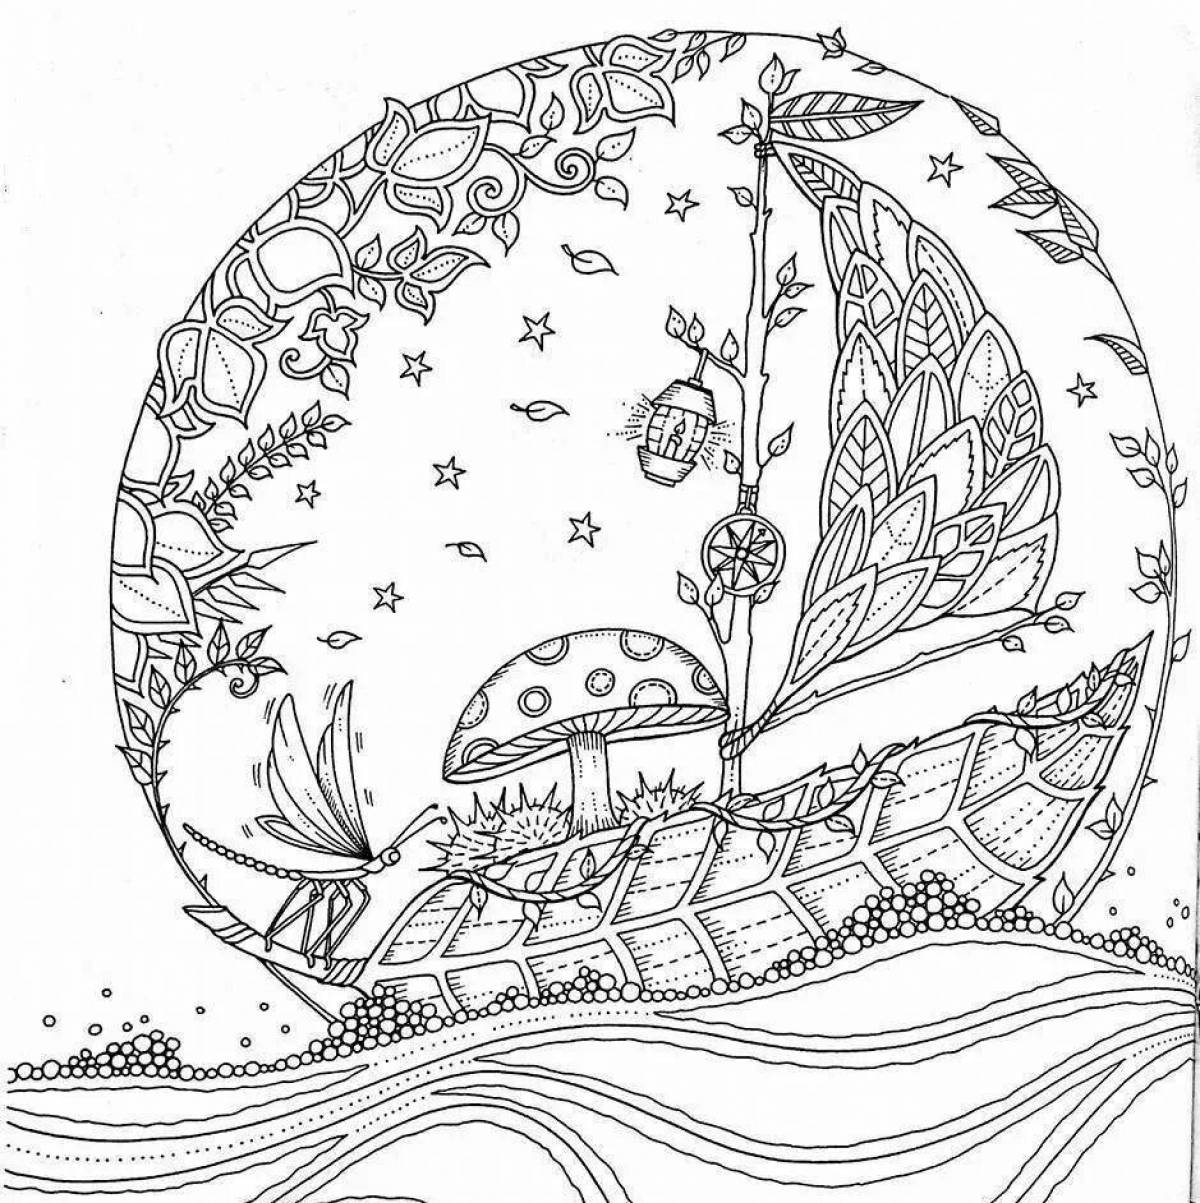 Wonderful forest coloring page